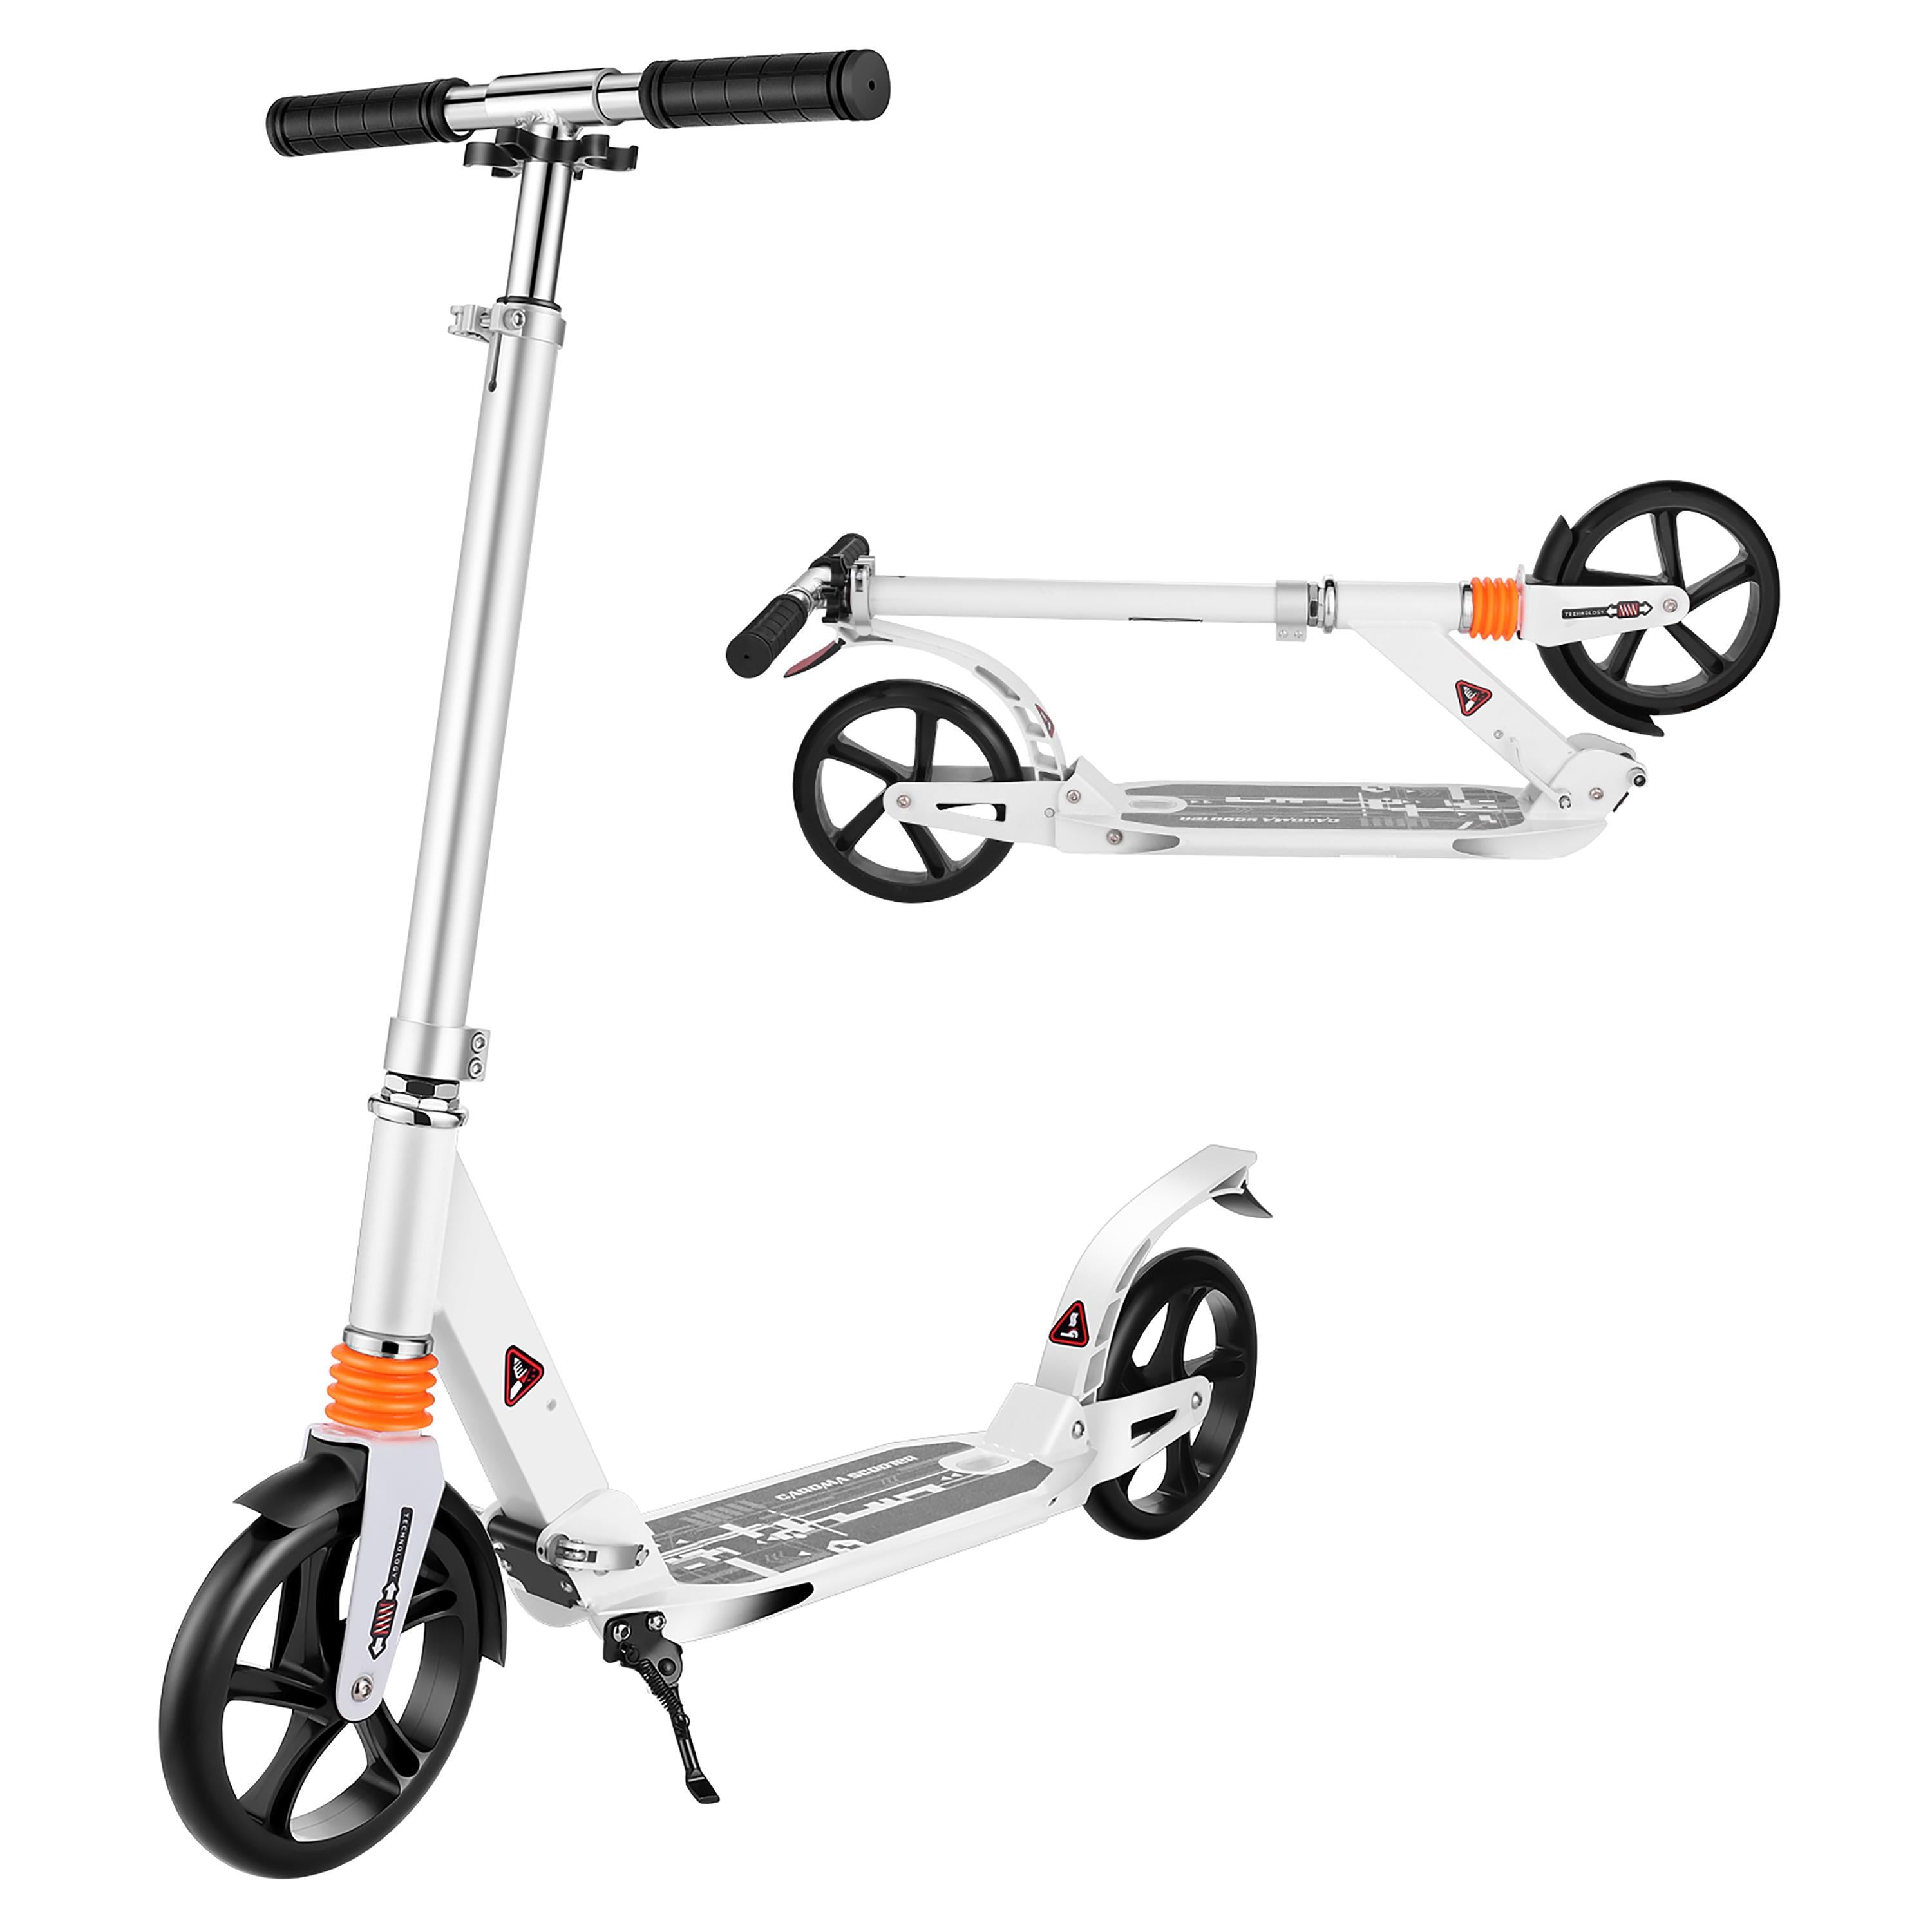 Hikole Kick Scooters Foldable Scooter Height-Adjustable 3 Flash Wheels for Kids. 